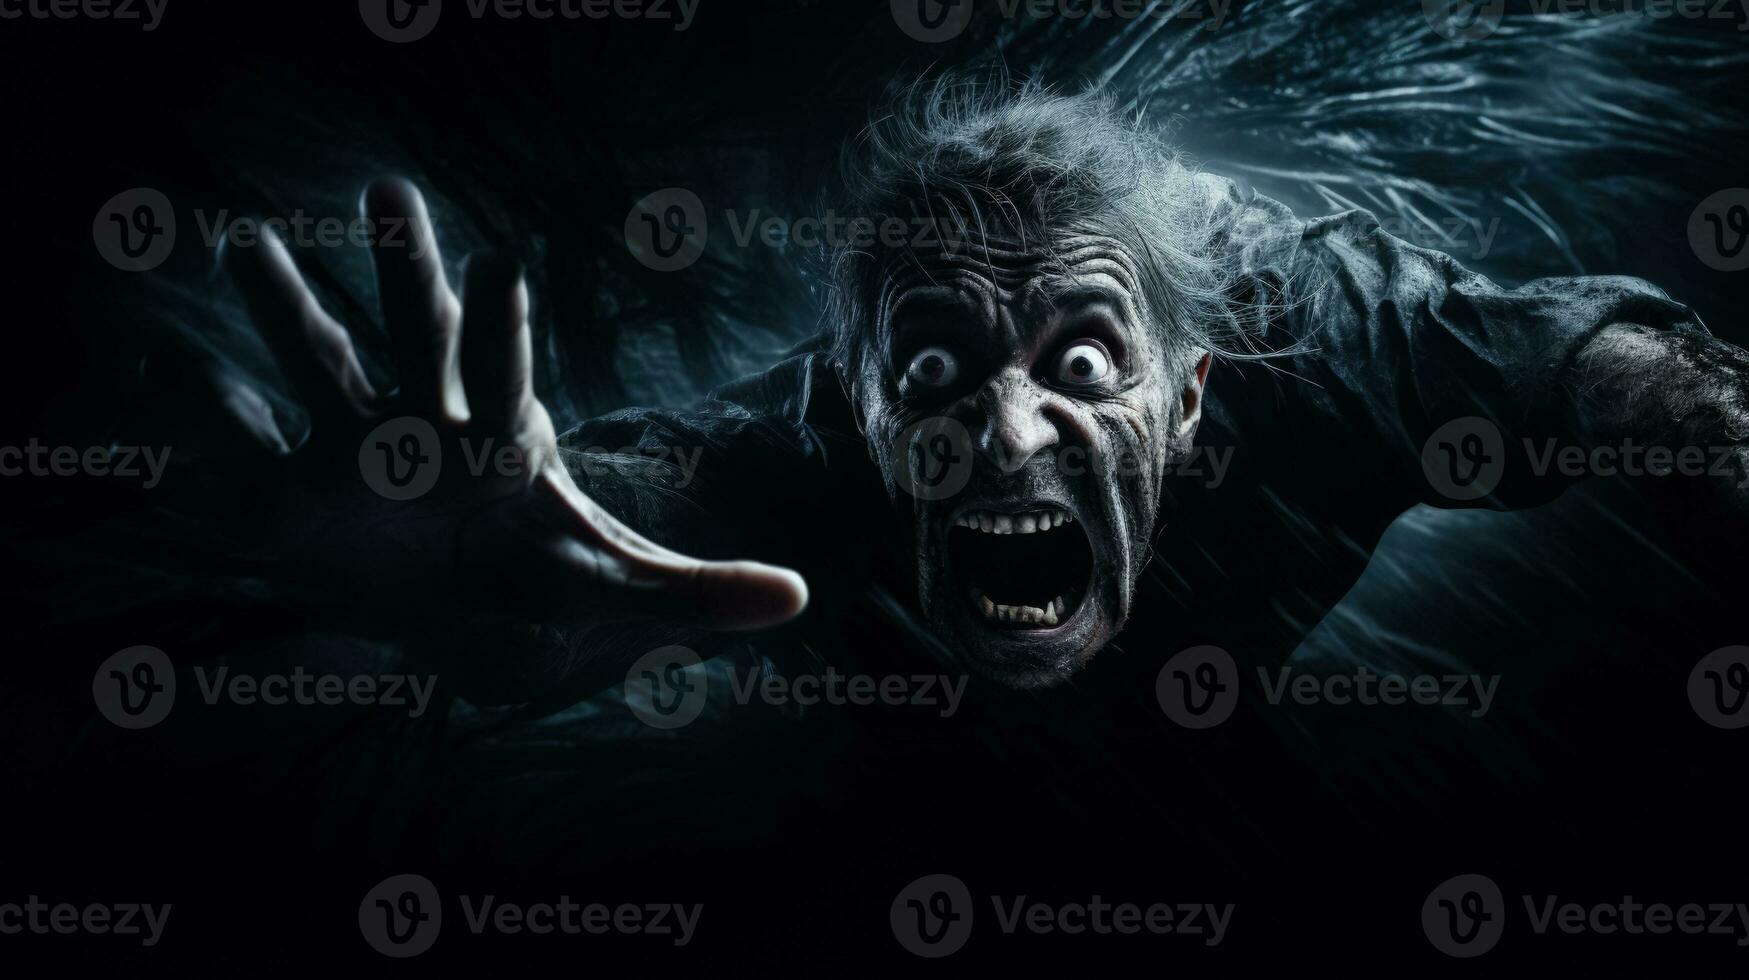 Being chased by a monster shocked face of a person dark background with a place for text photorealism photo